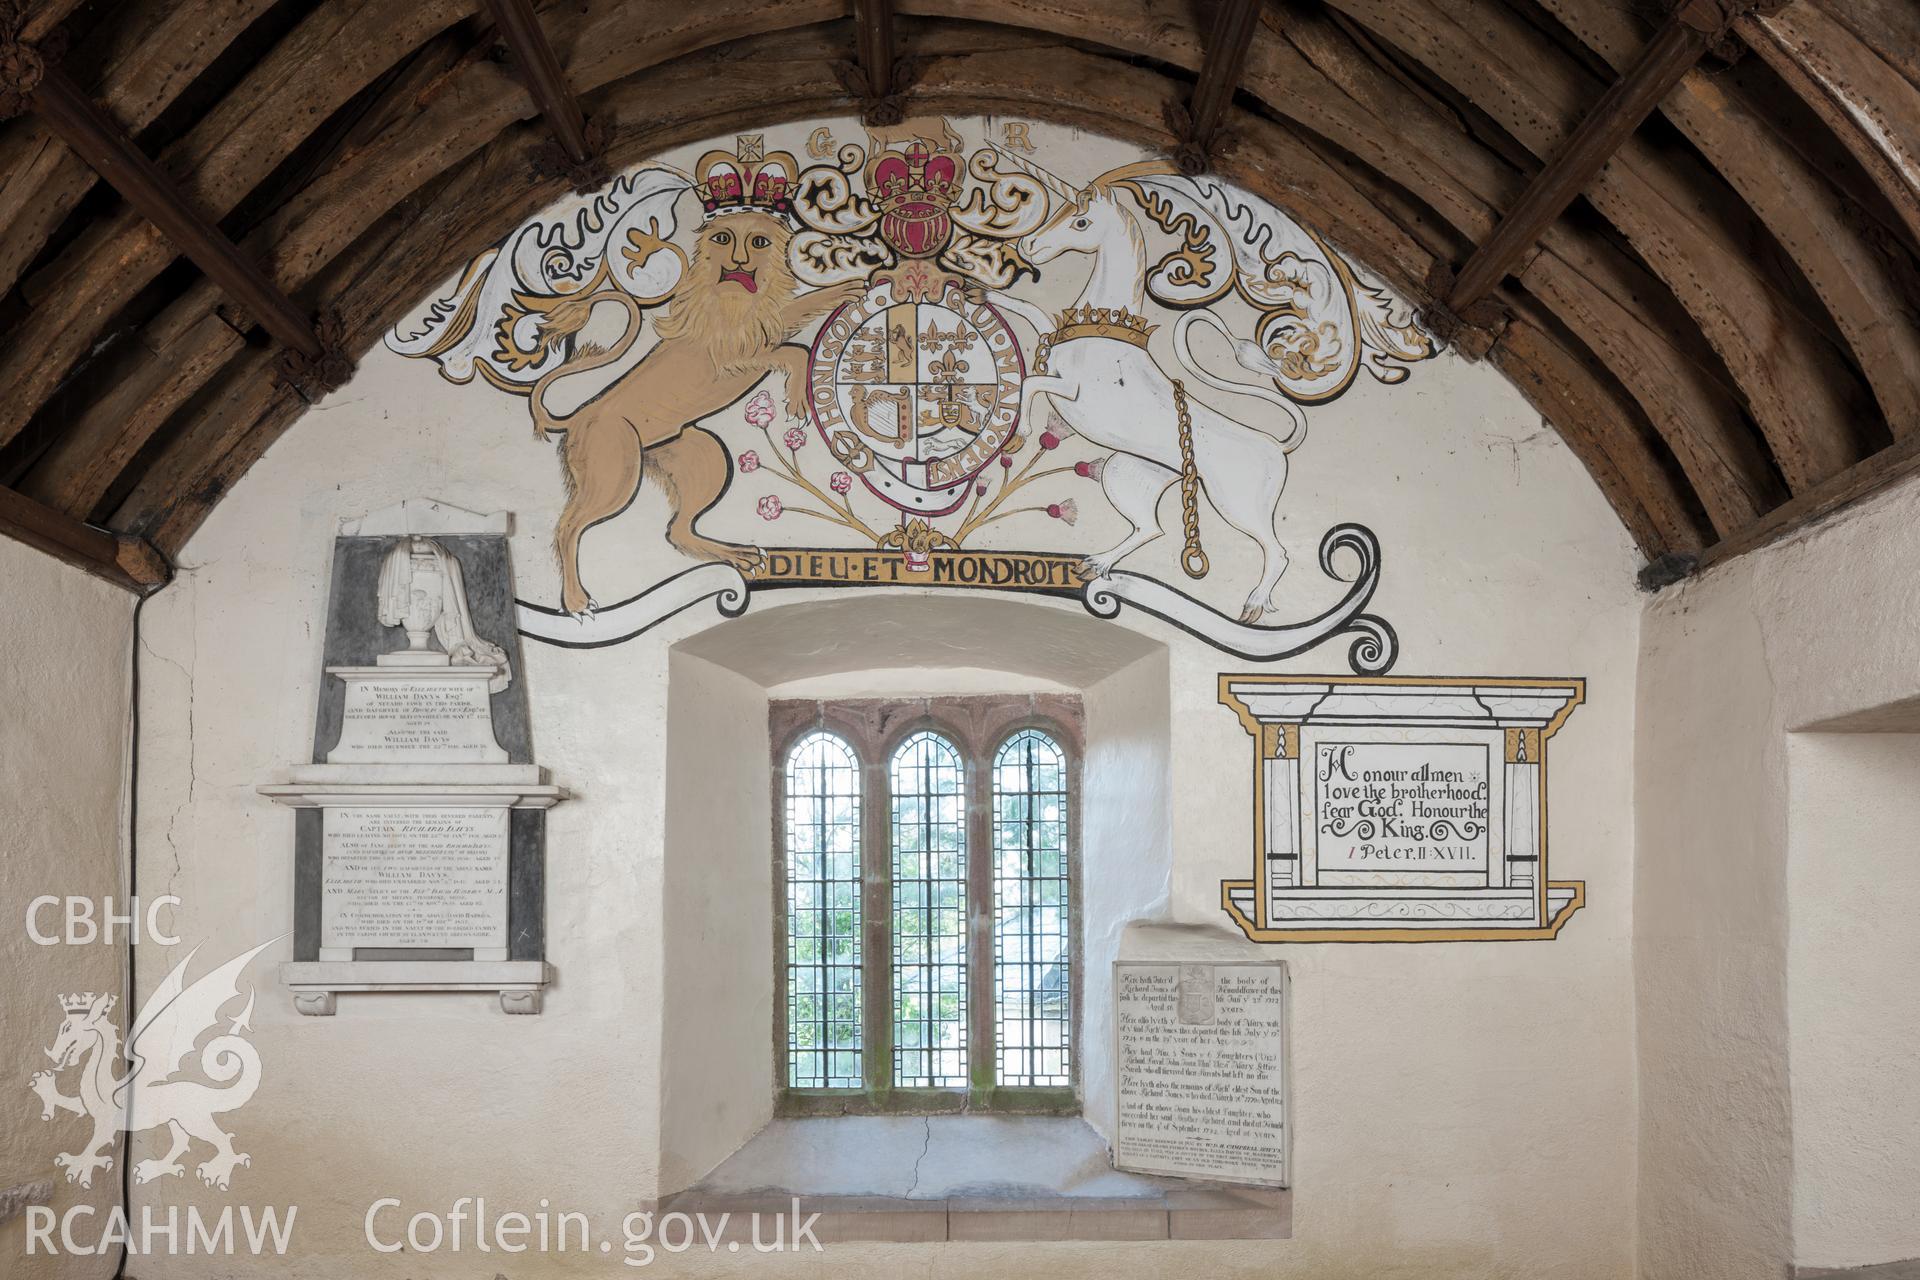 Wall painting, Royal coat of arms, over altar in chancel